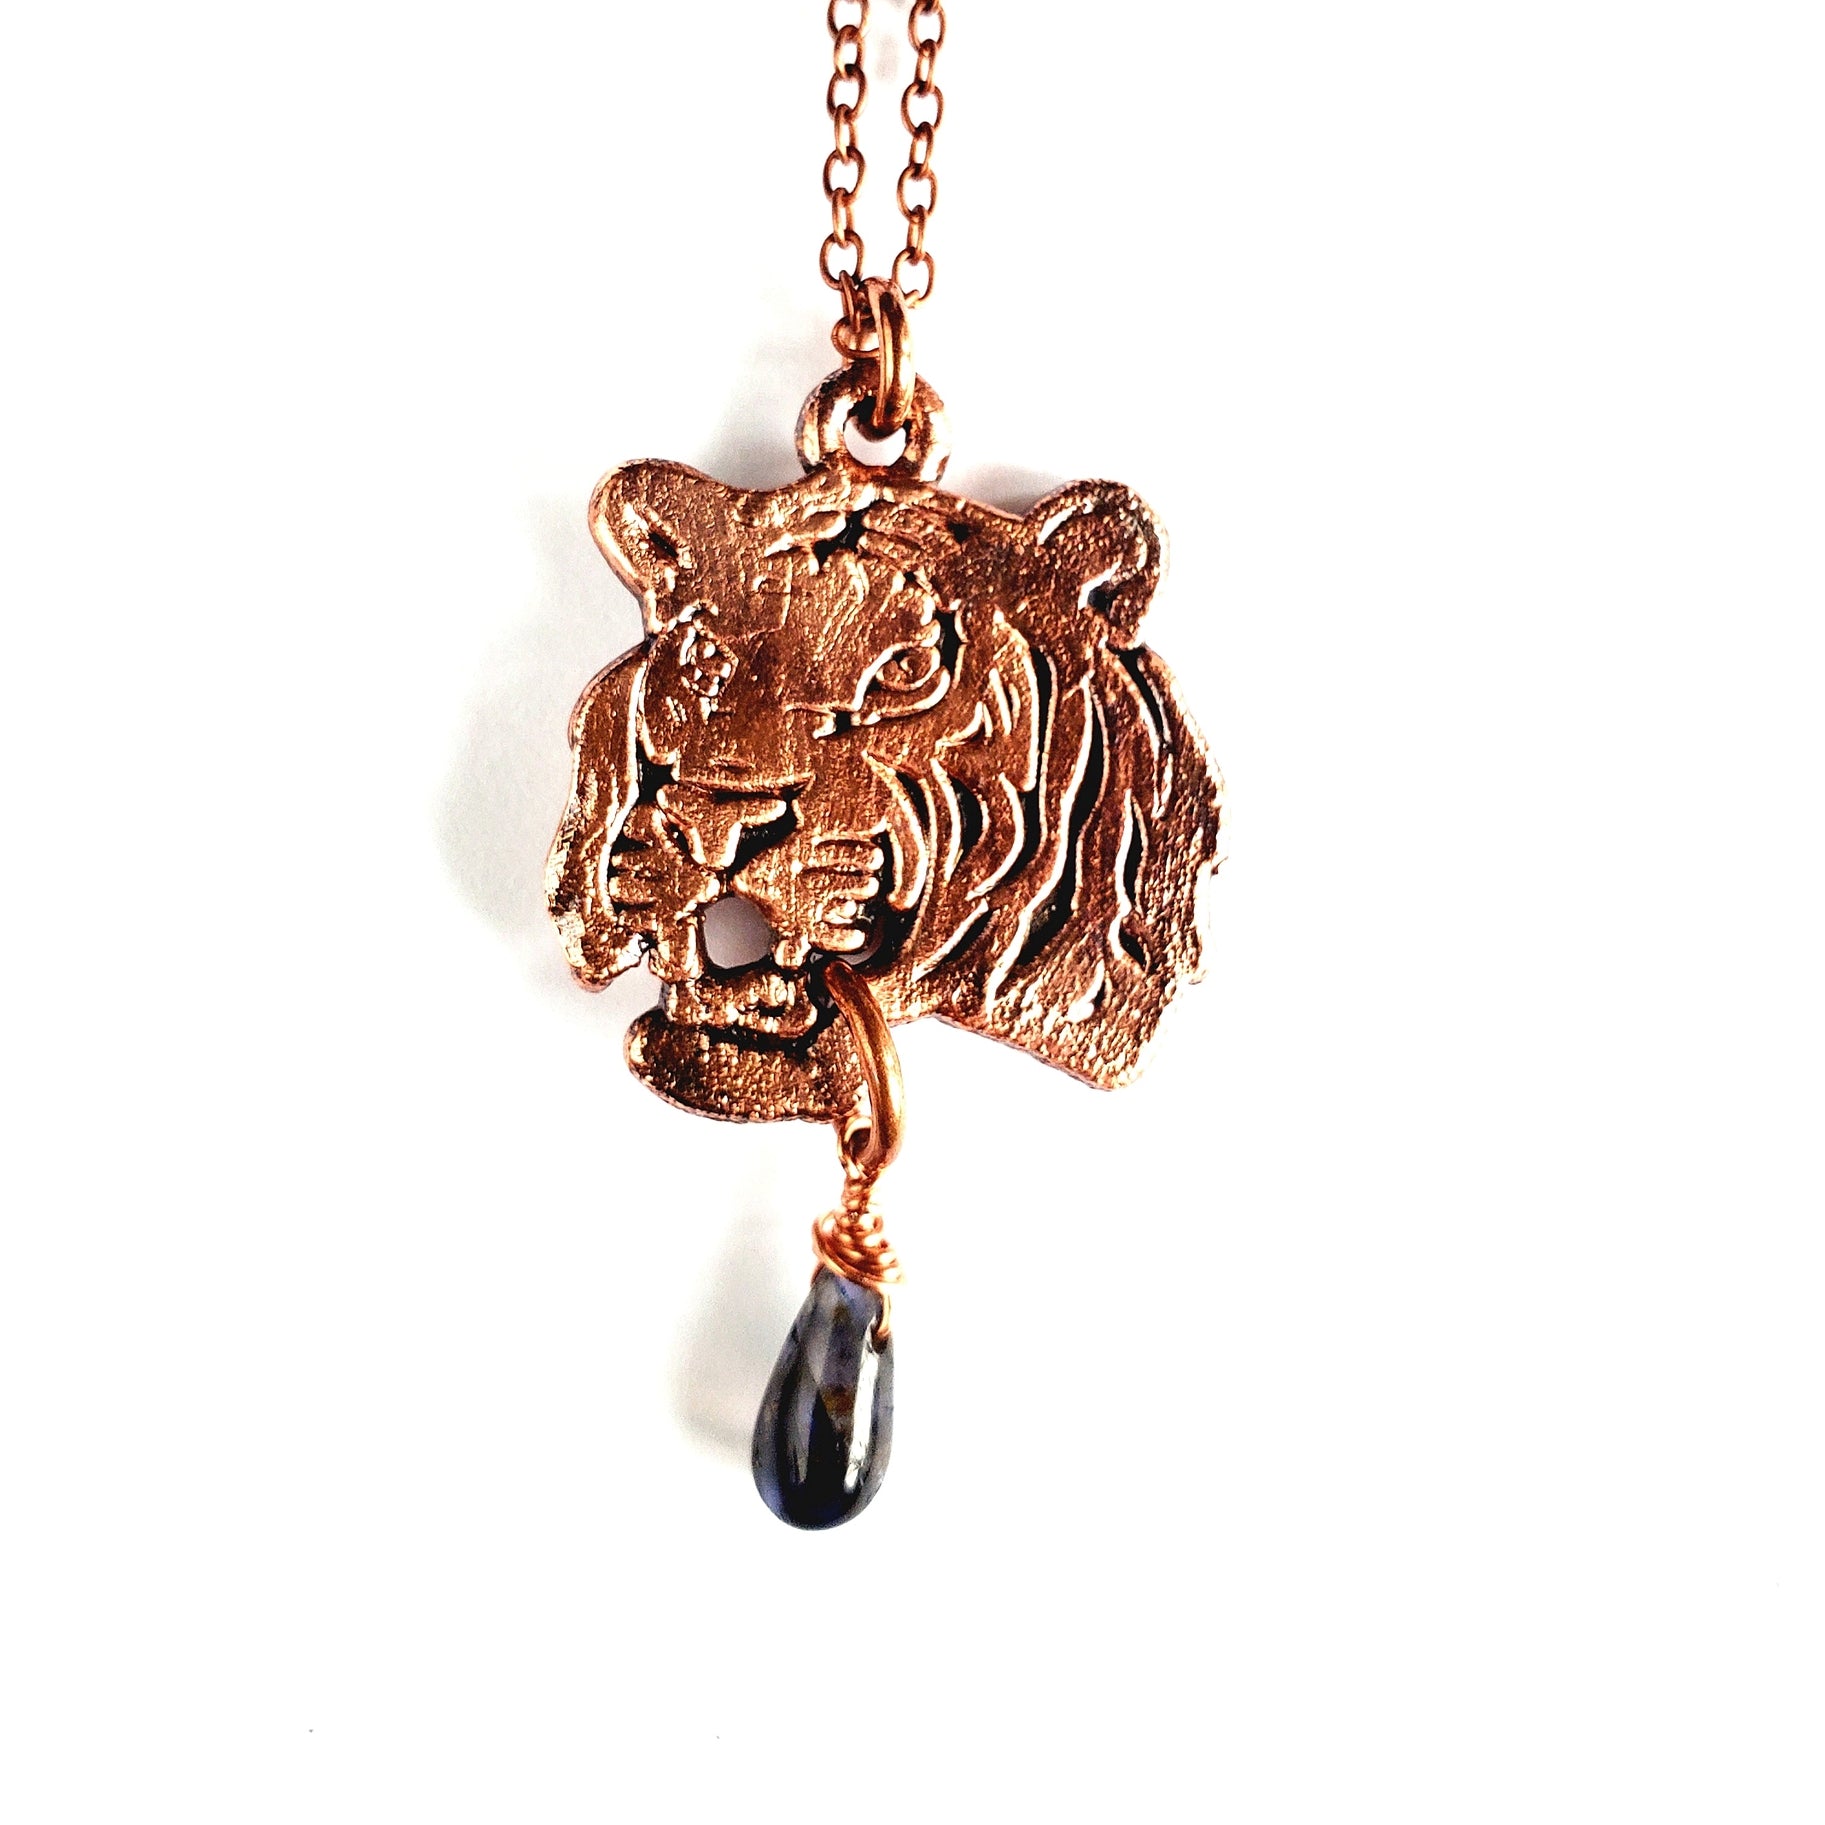 Sapphire Water Tiger necklace